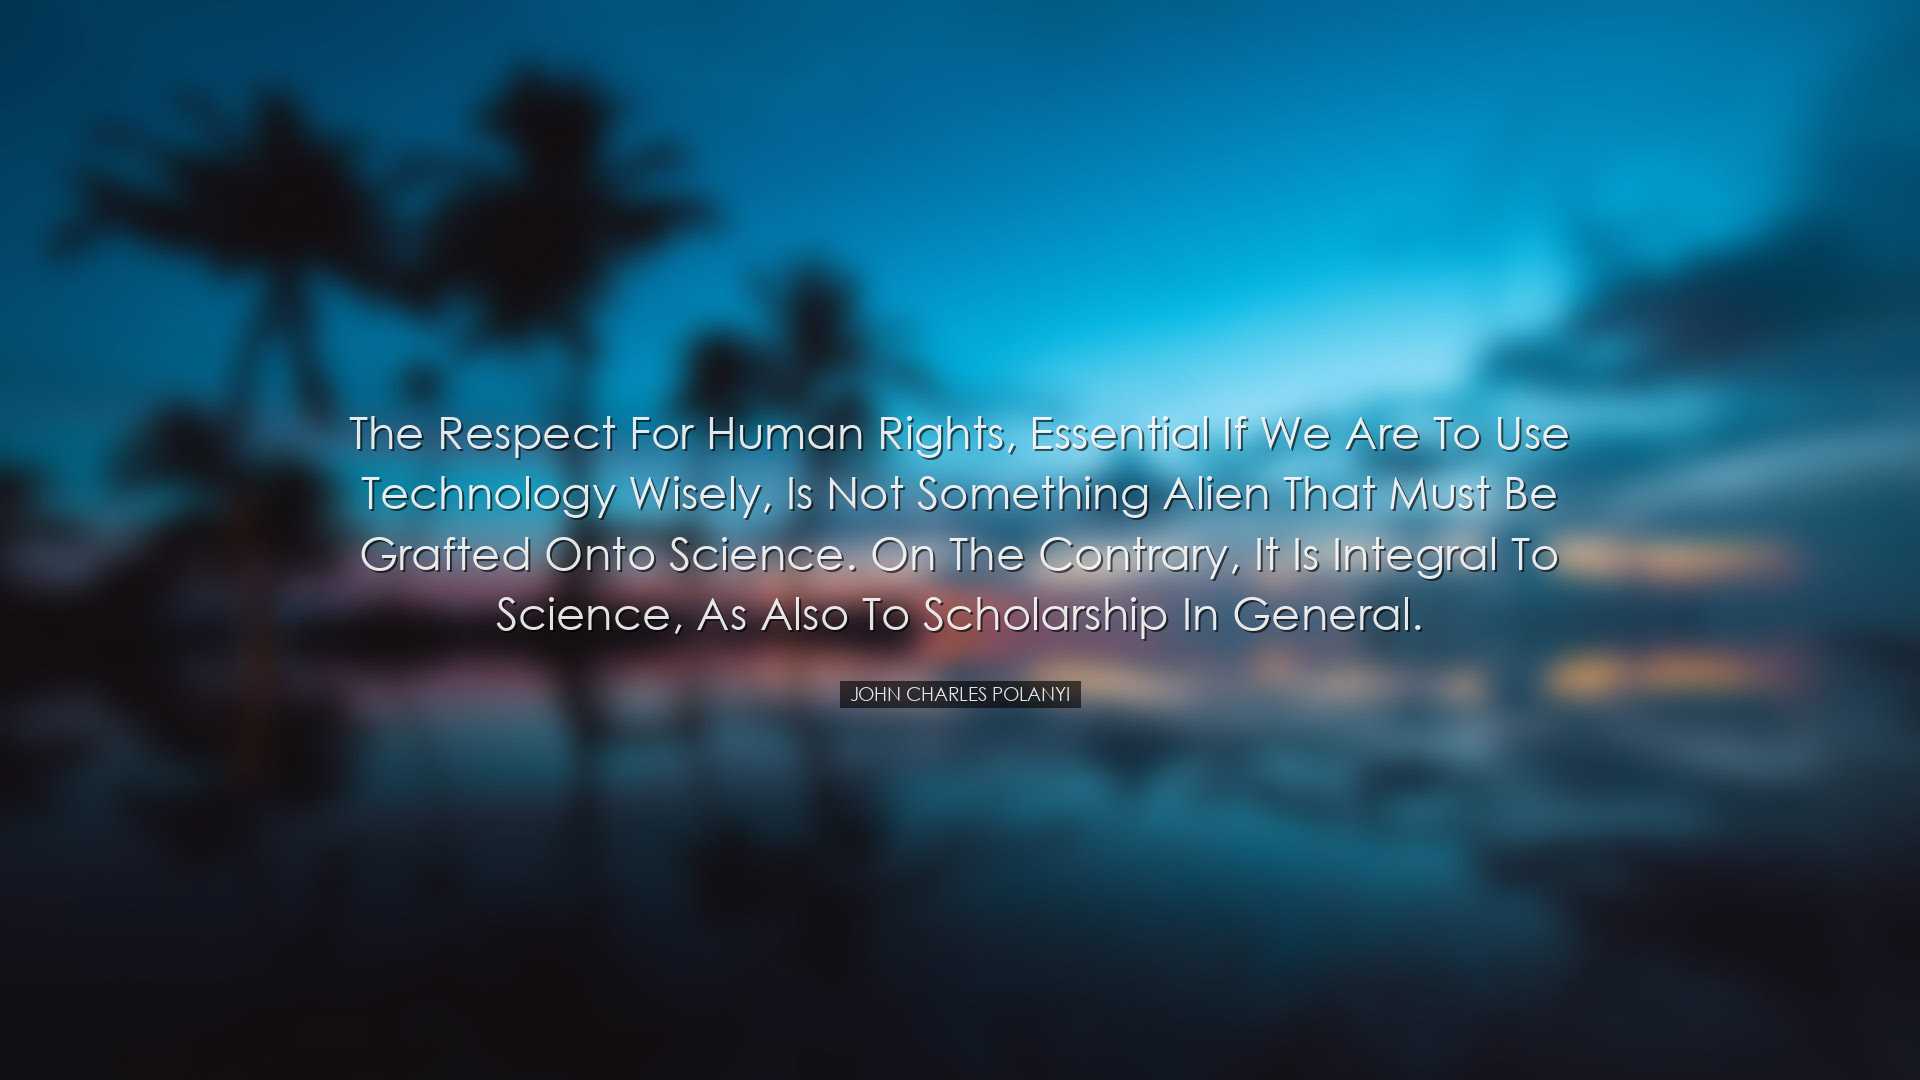 The respect for human rights, essential if we are to use technolog